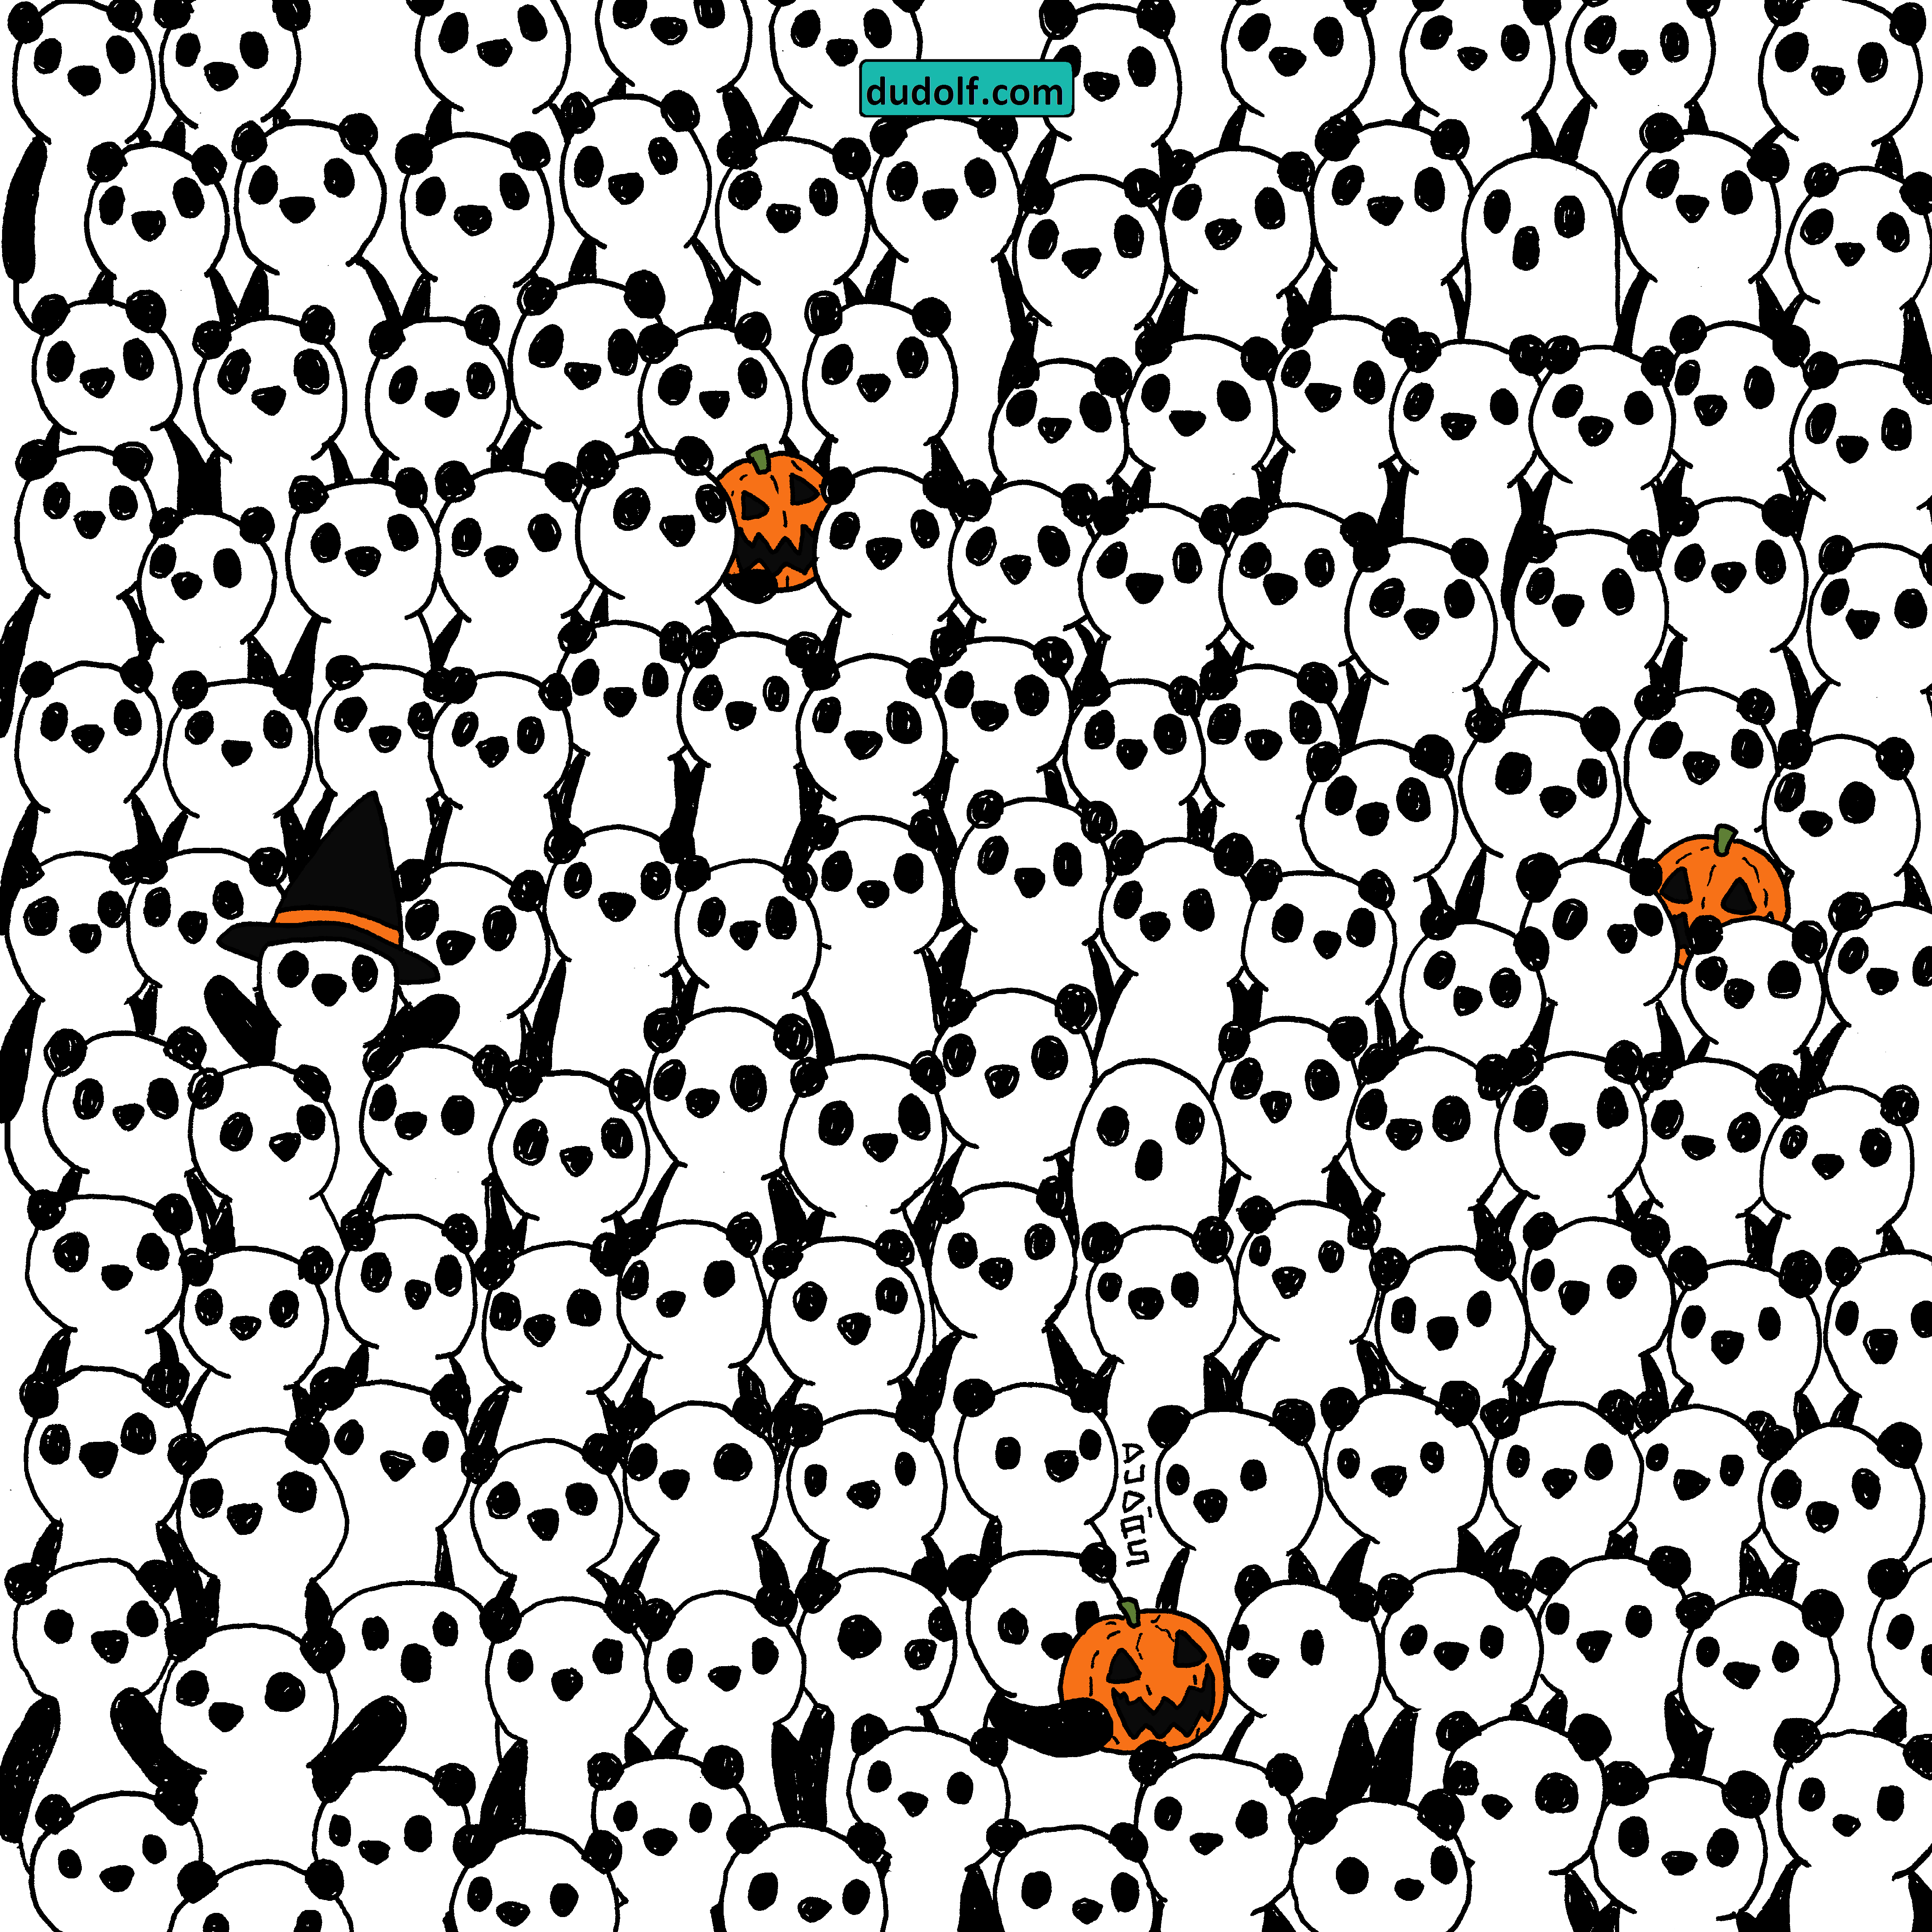 Brain teaser: Can you find the 3 ghosts hidden among the pandas?